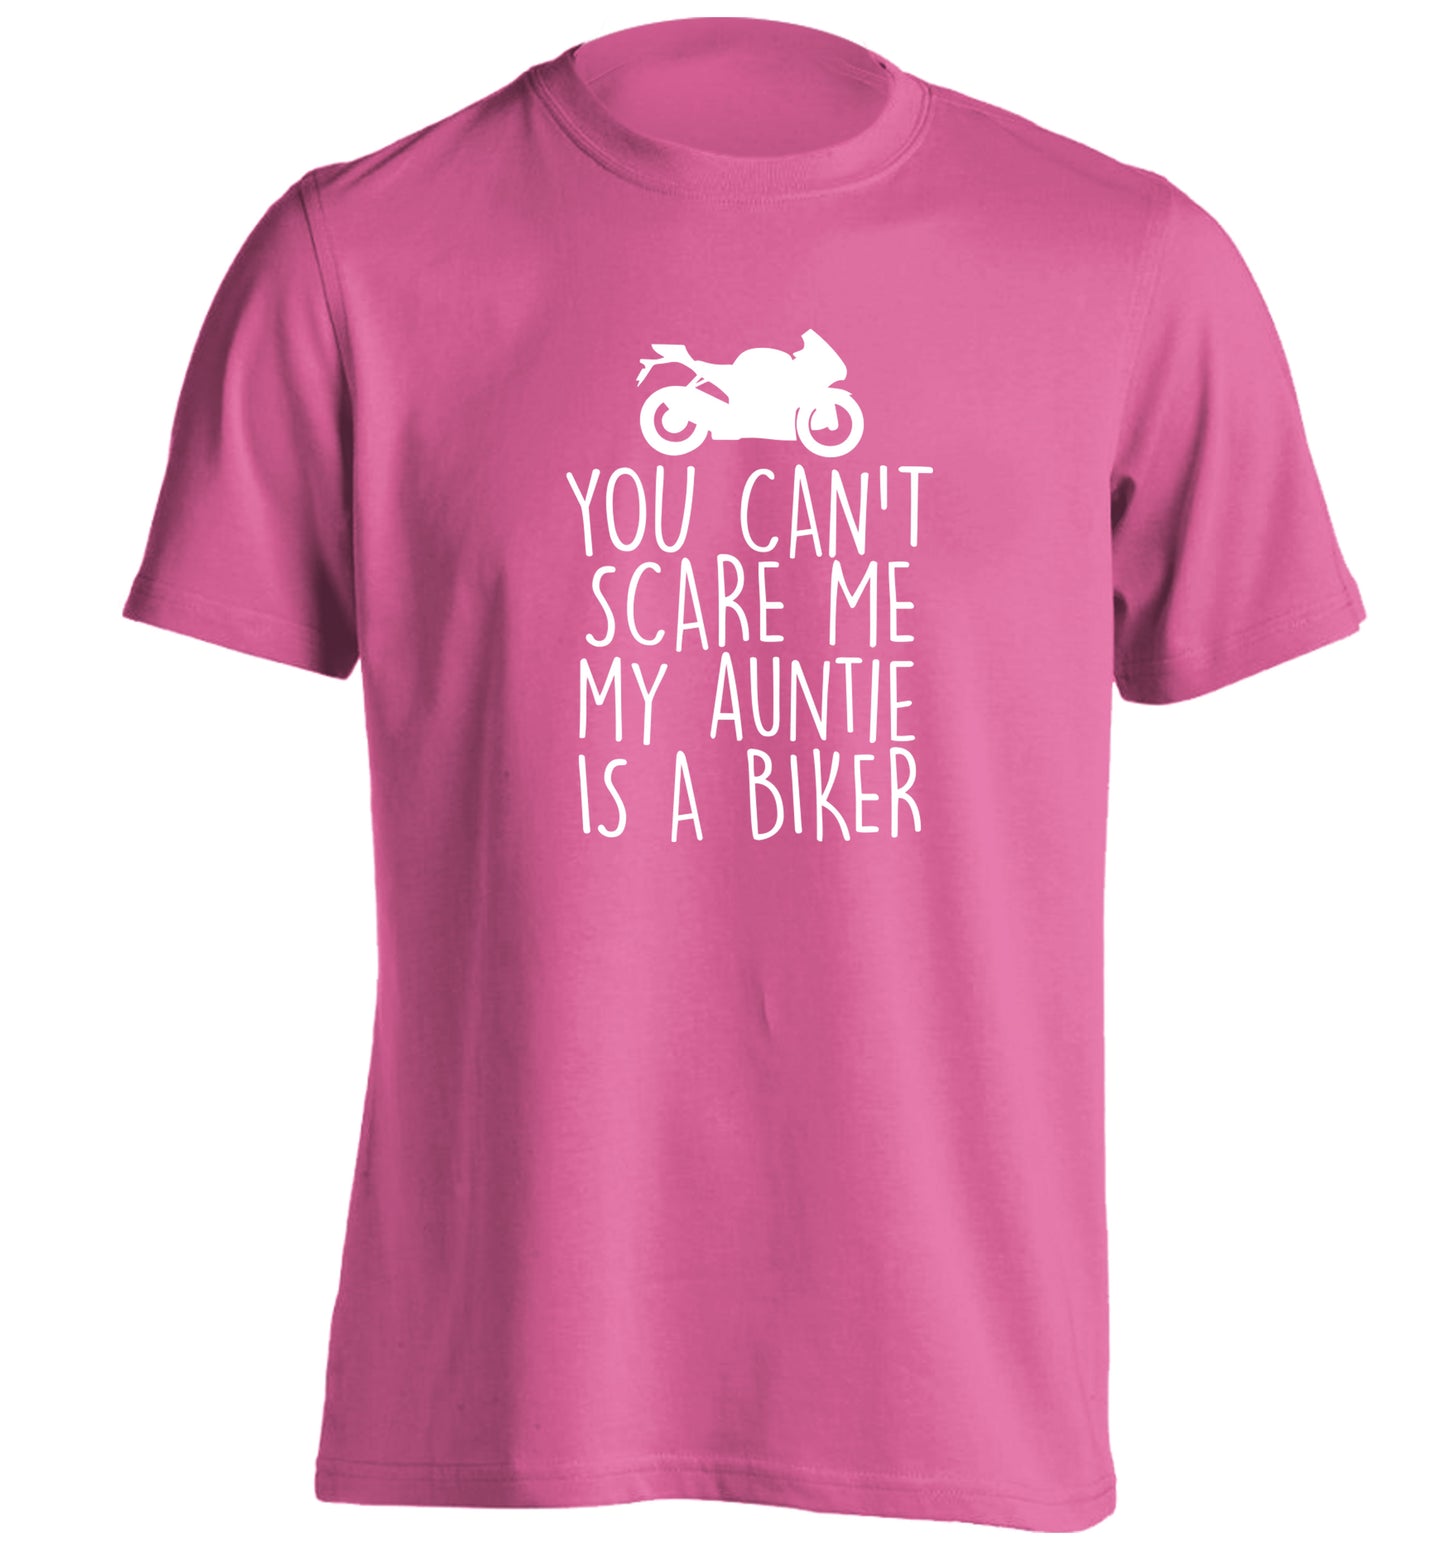 You can't scare me my auntie is a biker adults unisex pink Tshirt 2XL